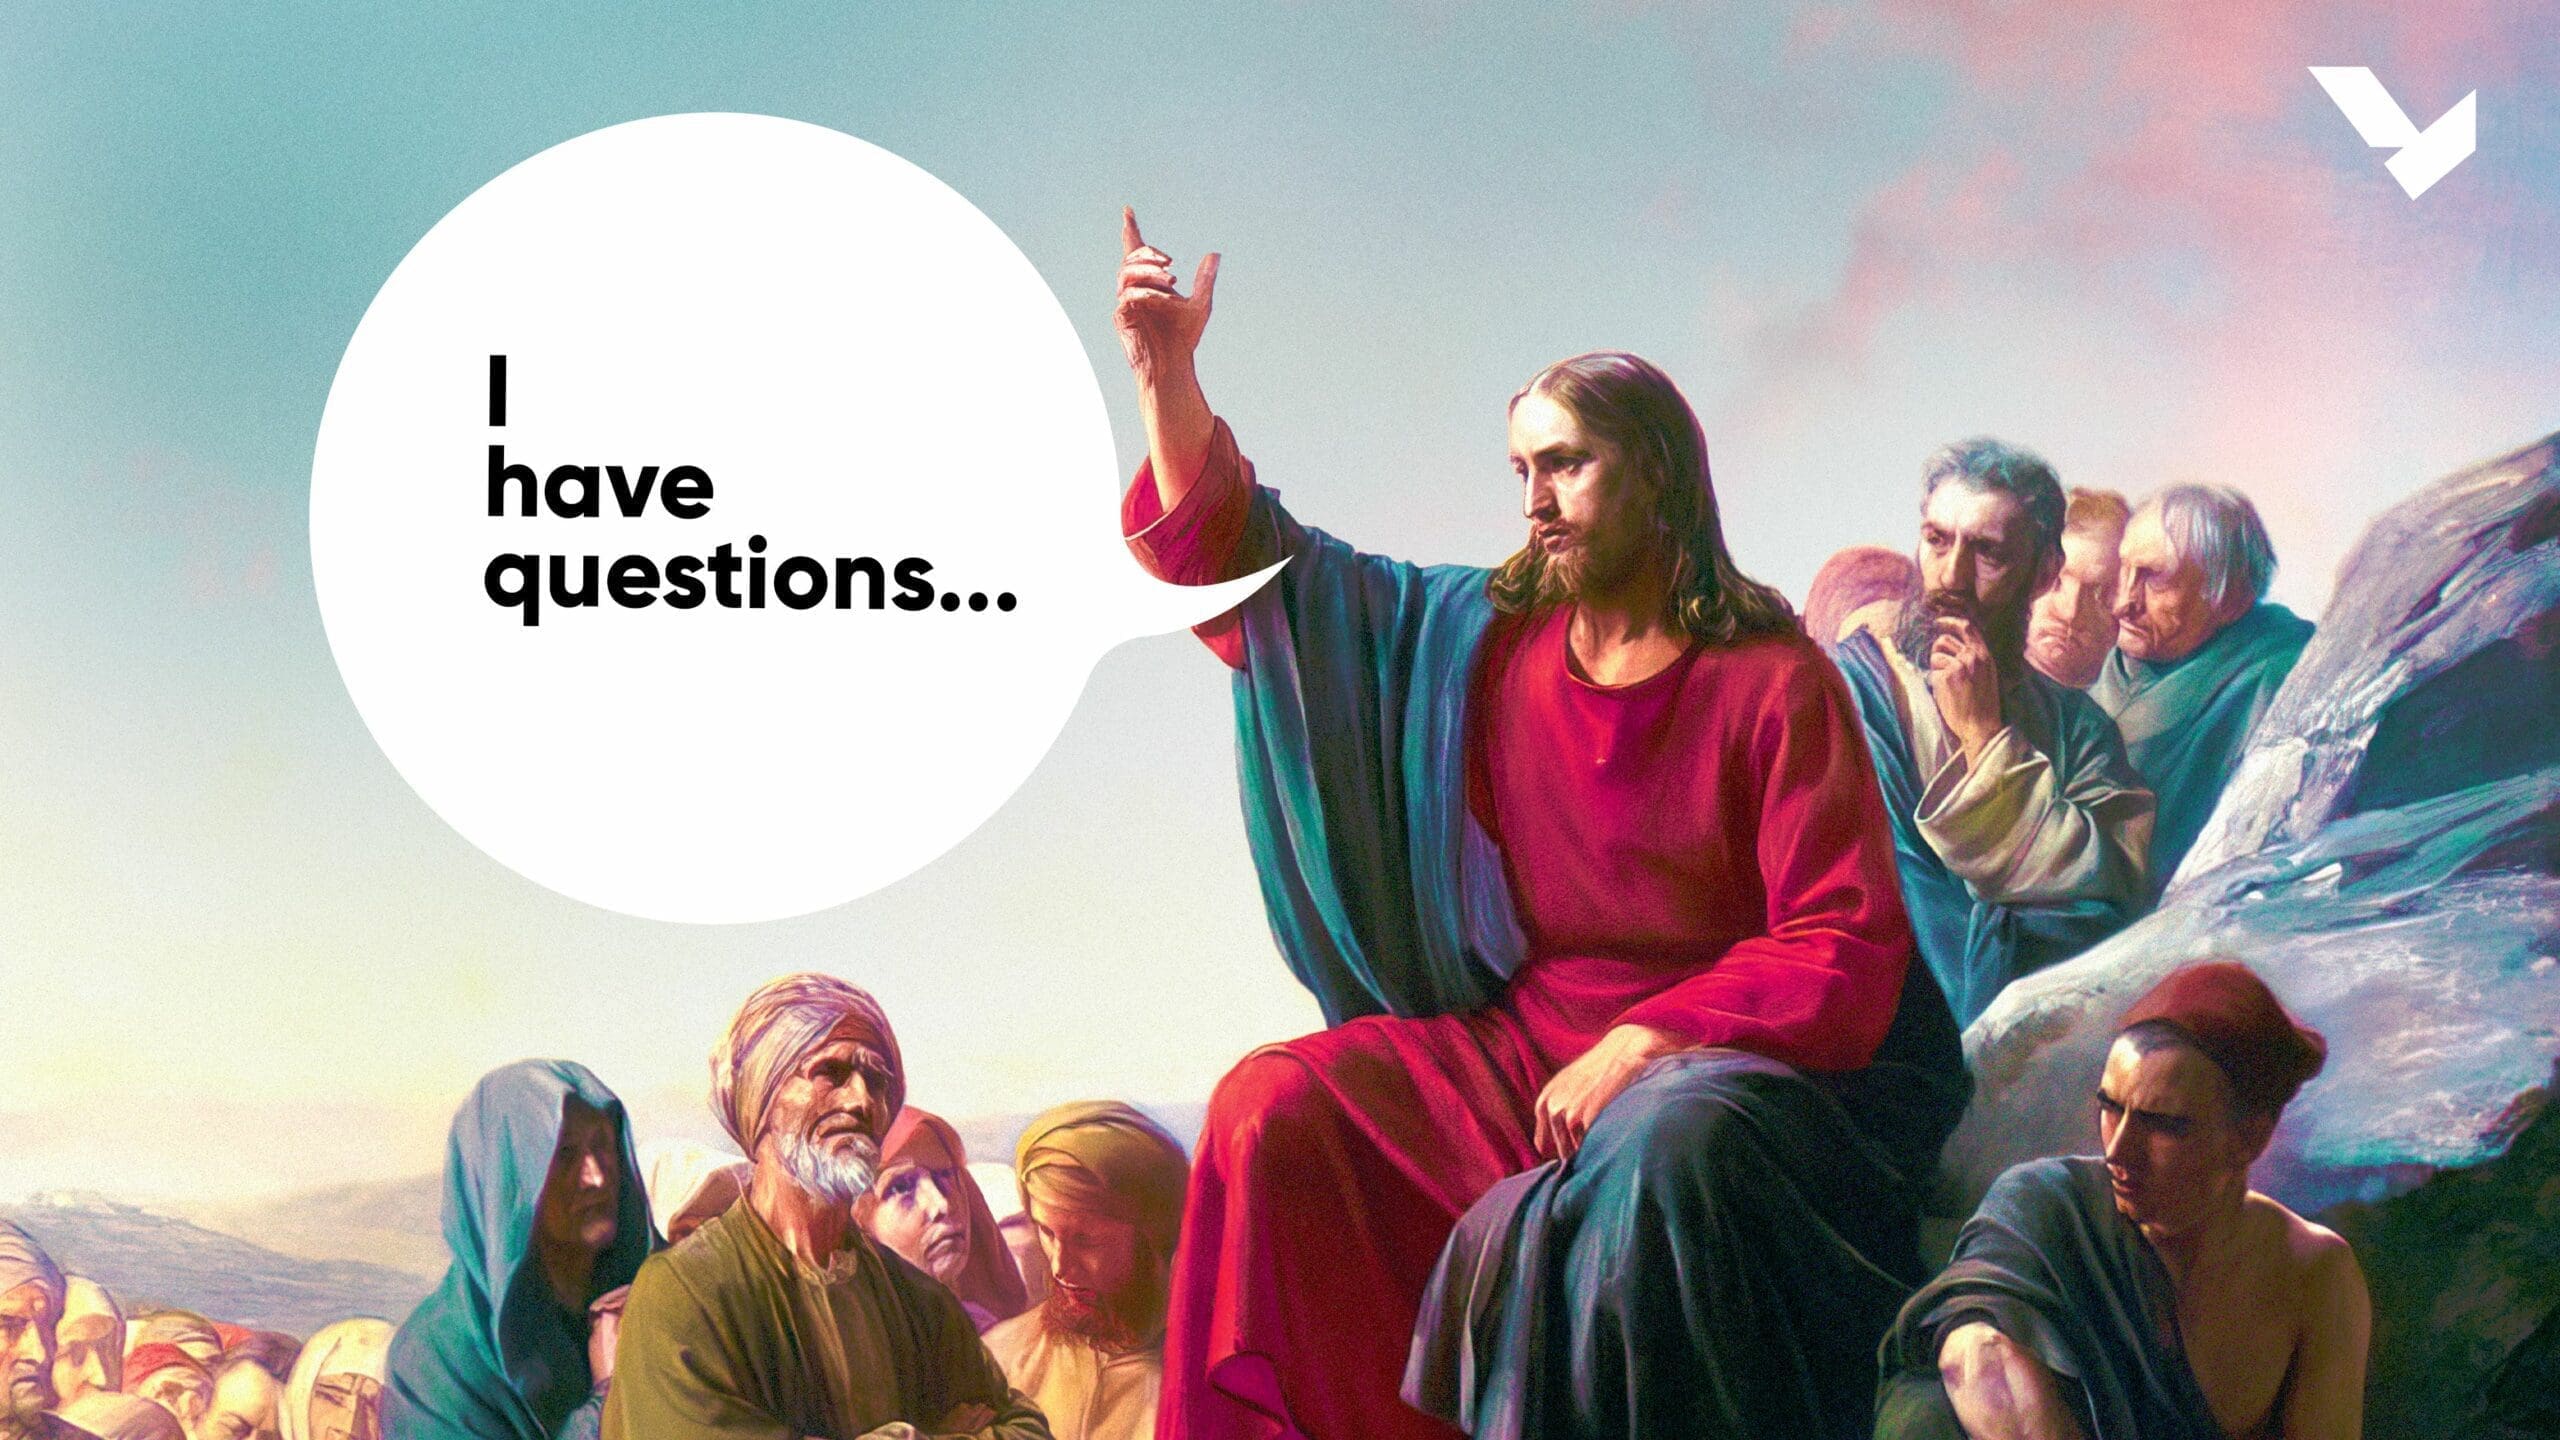 Jesus asking Questions, I have questions sermon graphic